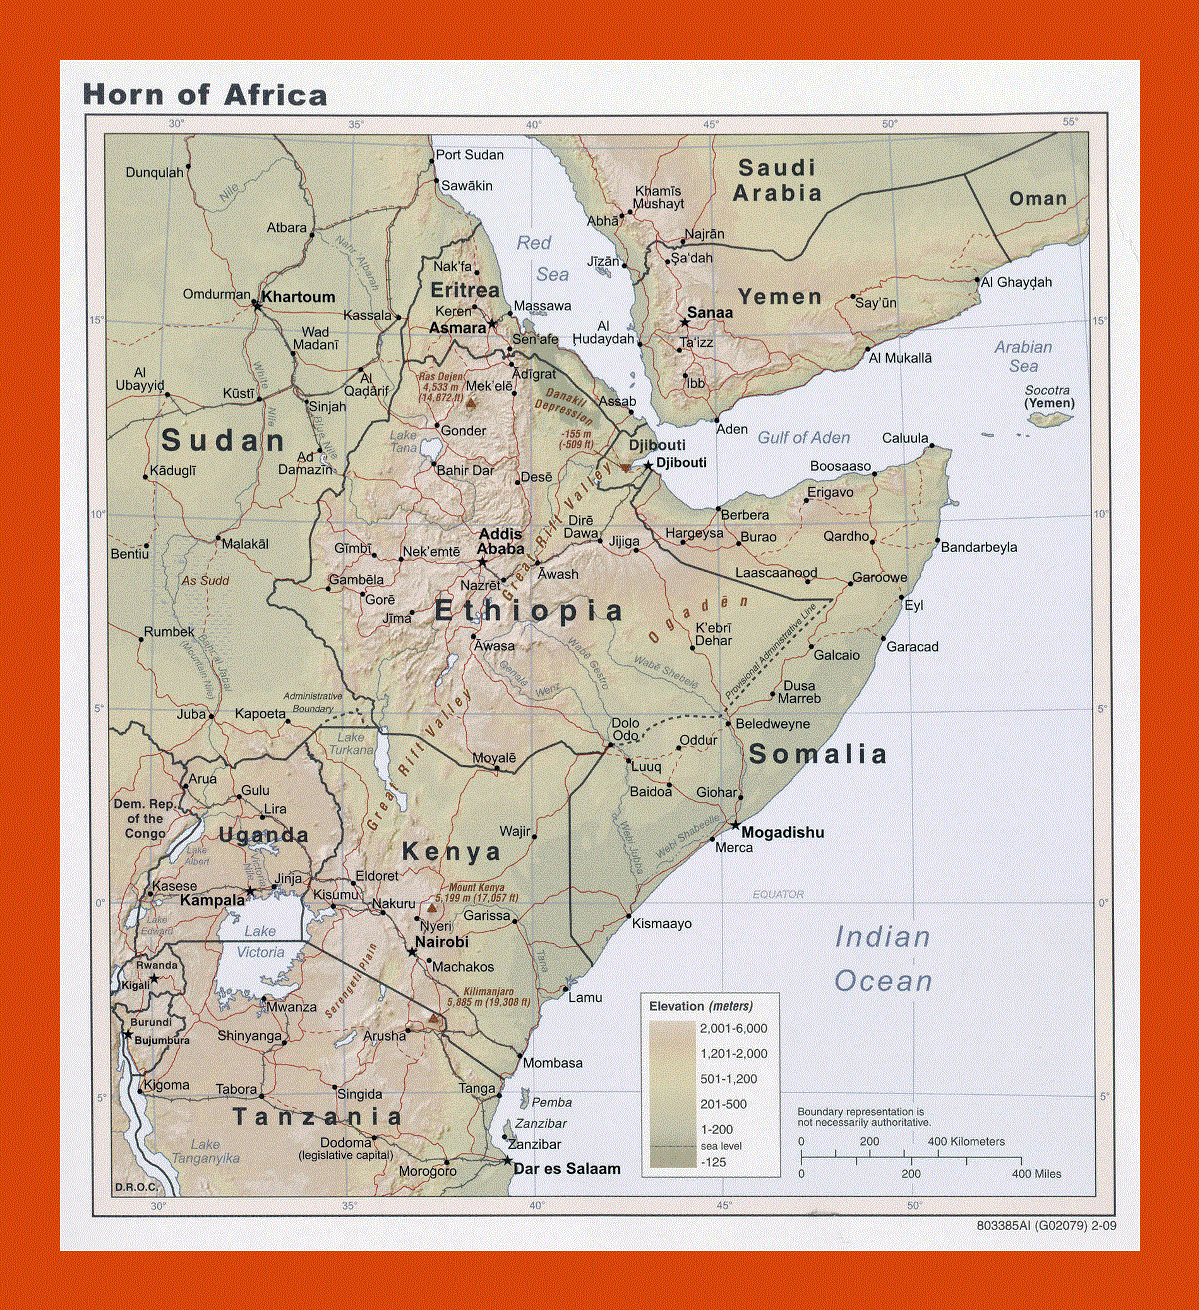 Elevation map of Horn of Africa - 2009